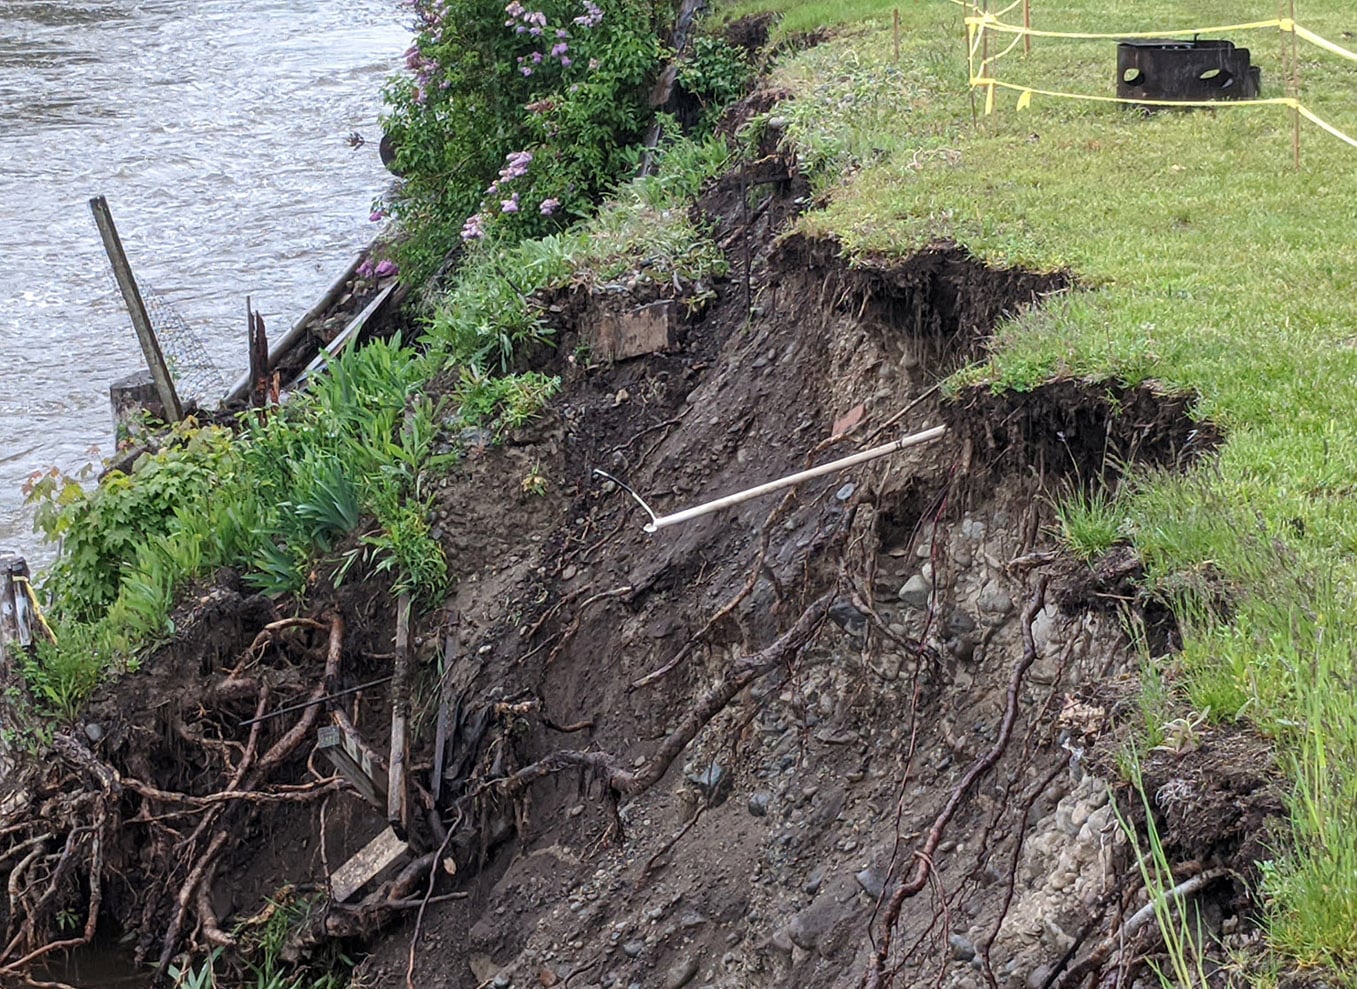 RDKB issues two evacuation alerts in City of Grand Forks due to erosion